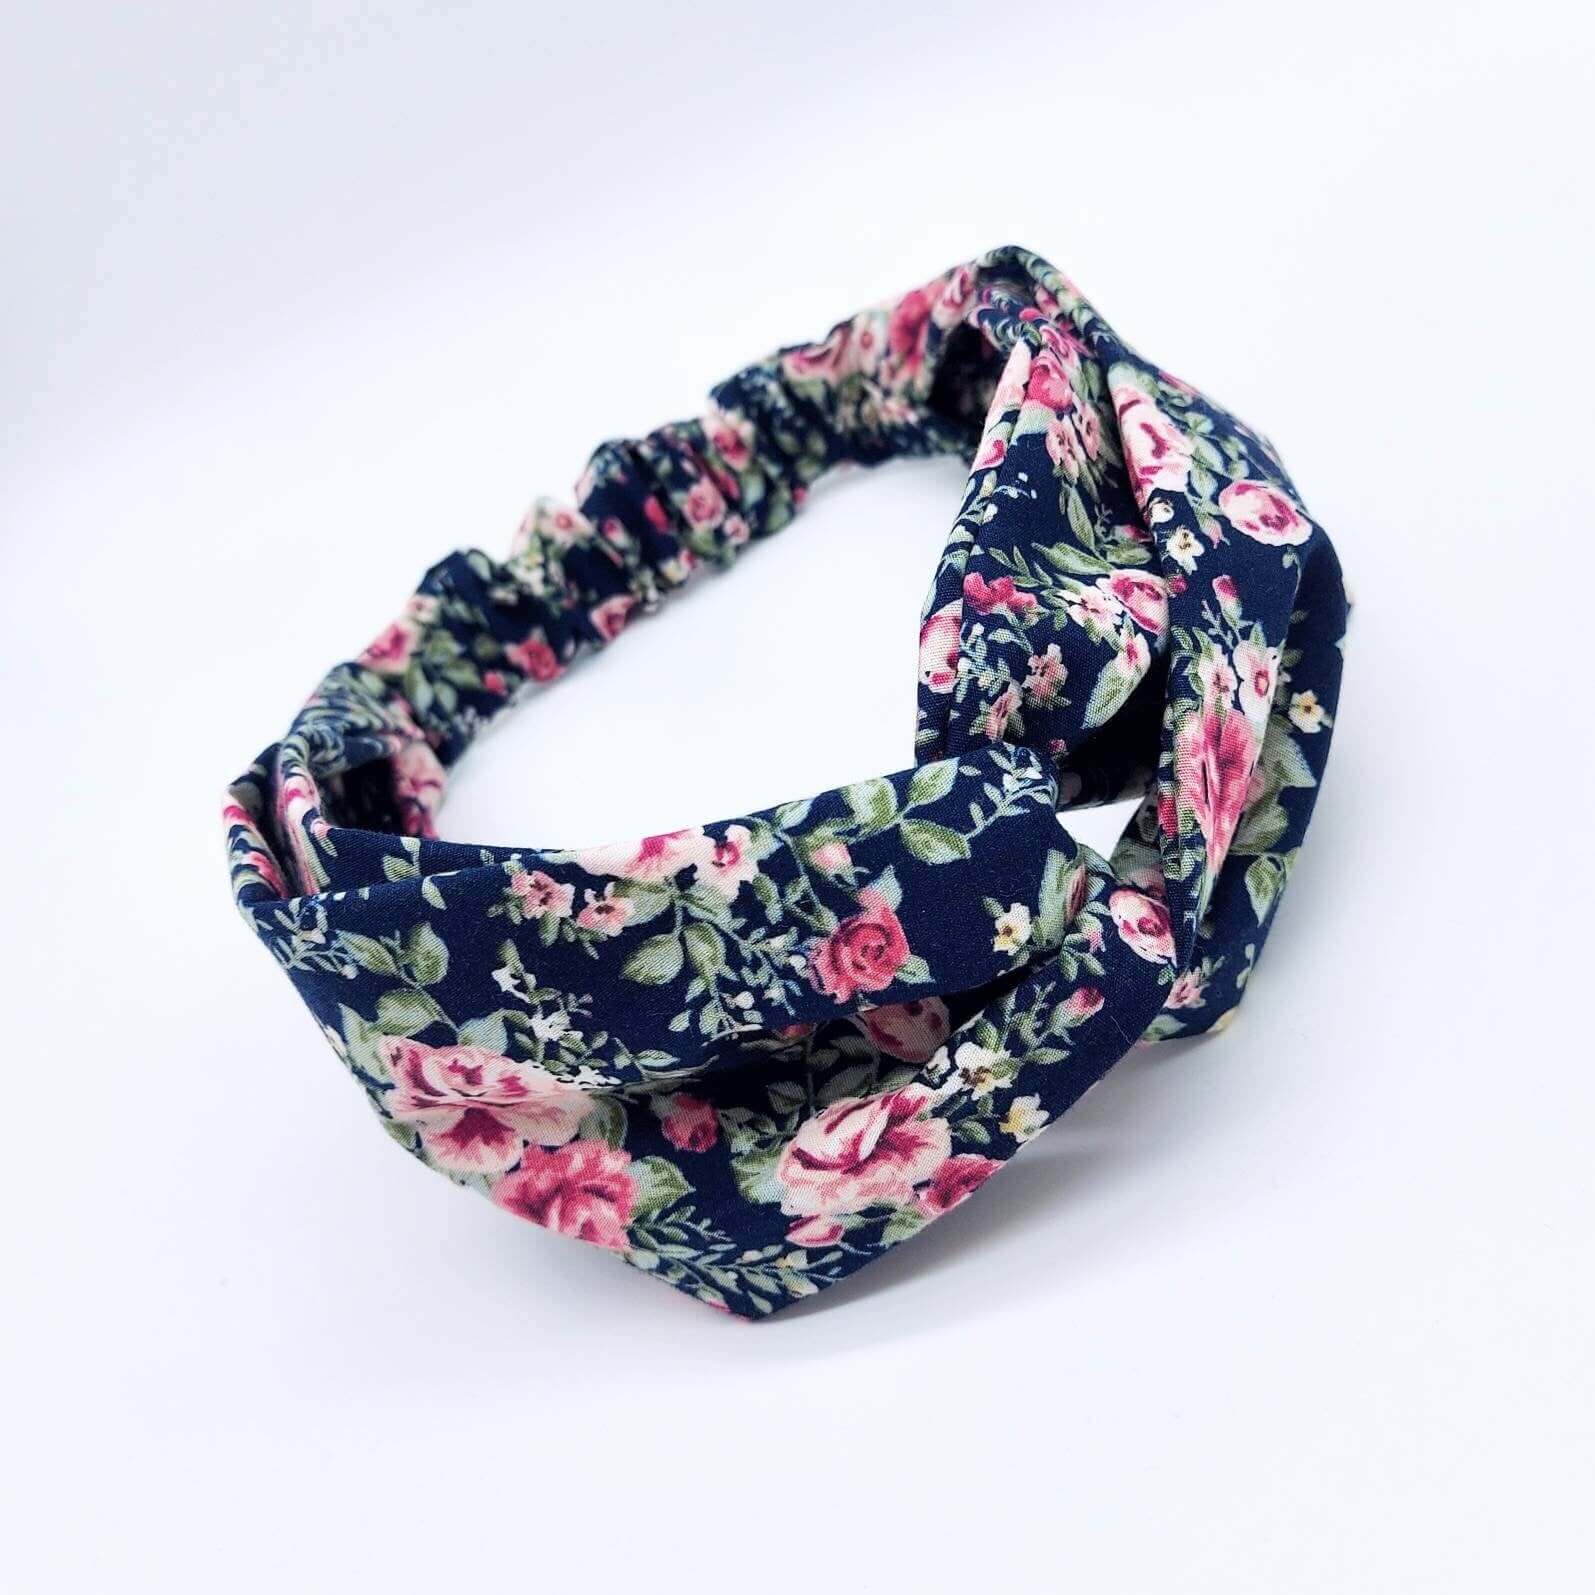 A navy blue, ditsy floral, cotton turban twist headband with an elasticated panel at the back.